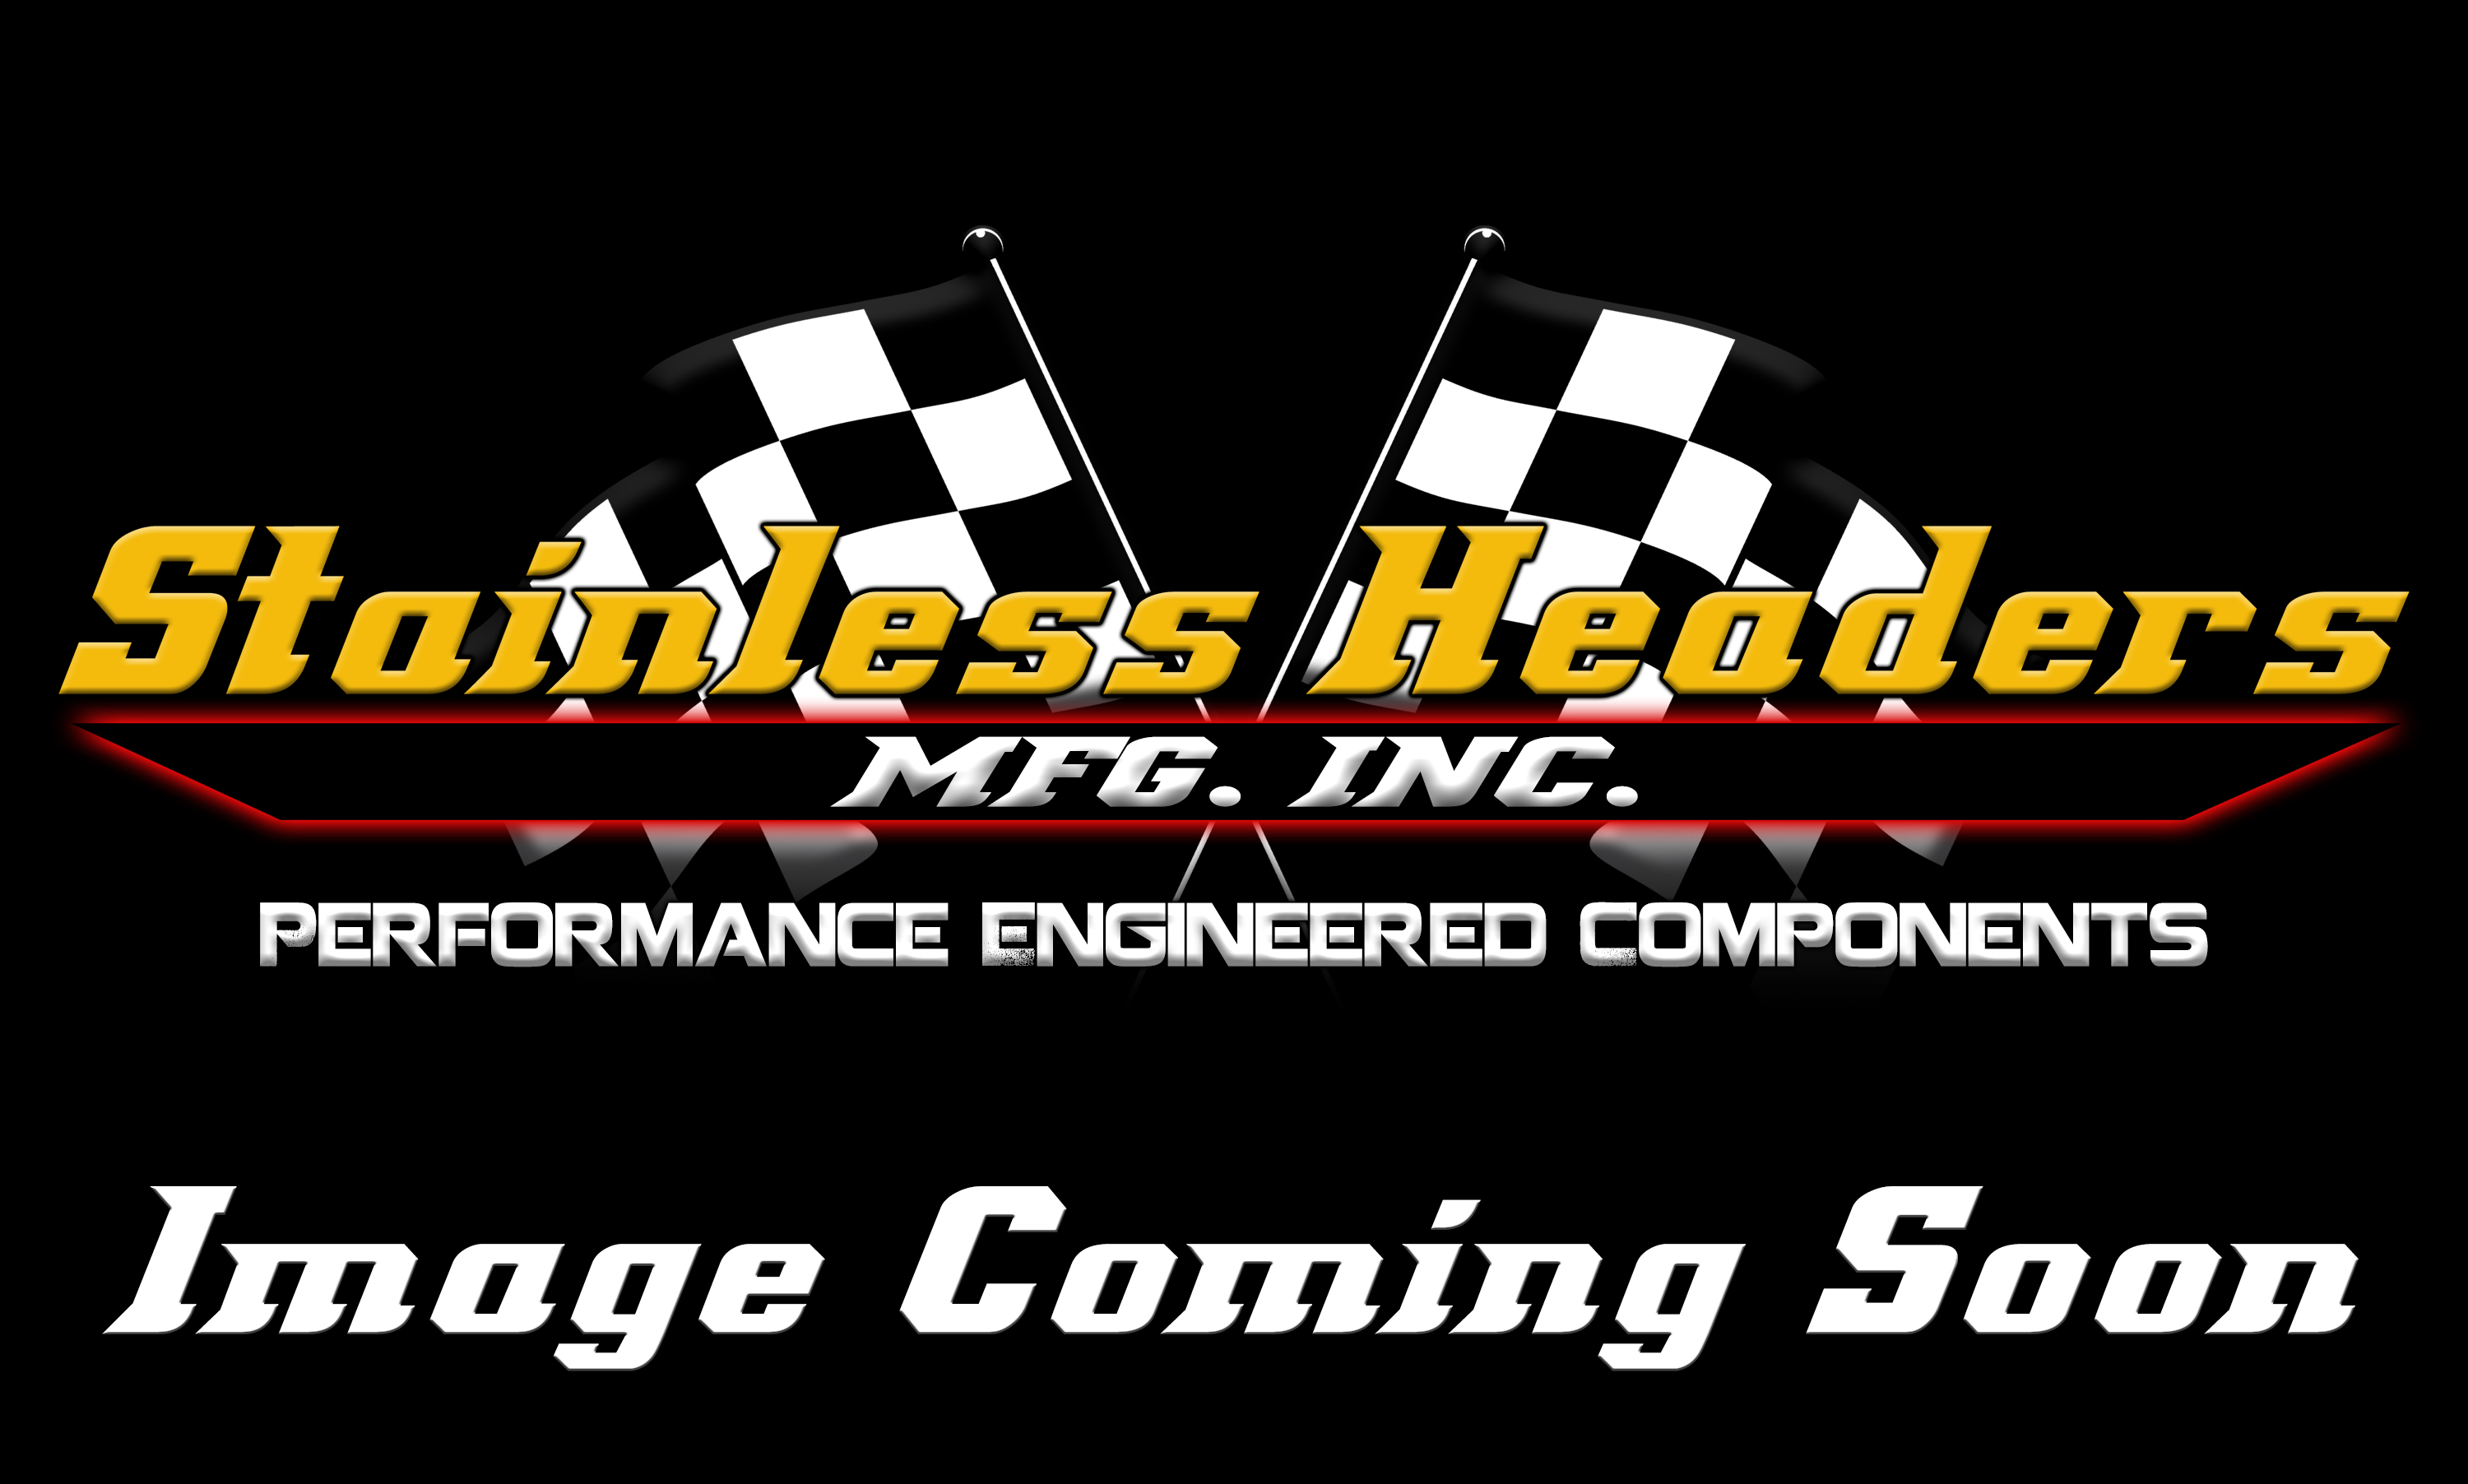 Stainless Headers - 1 3/4" Primary 3 into 1 Performance Merge Collector-16ga 321ss